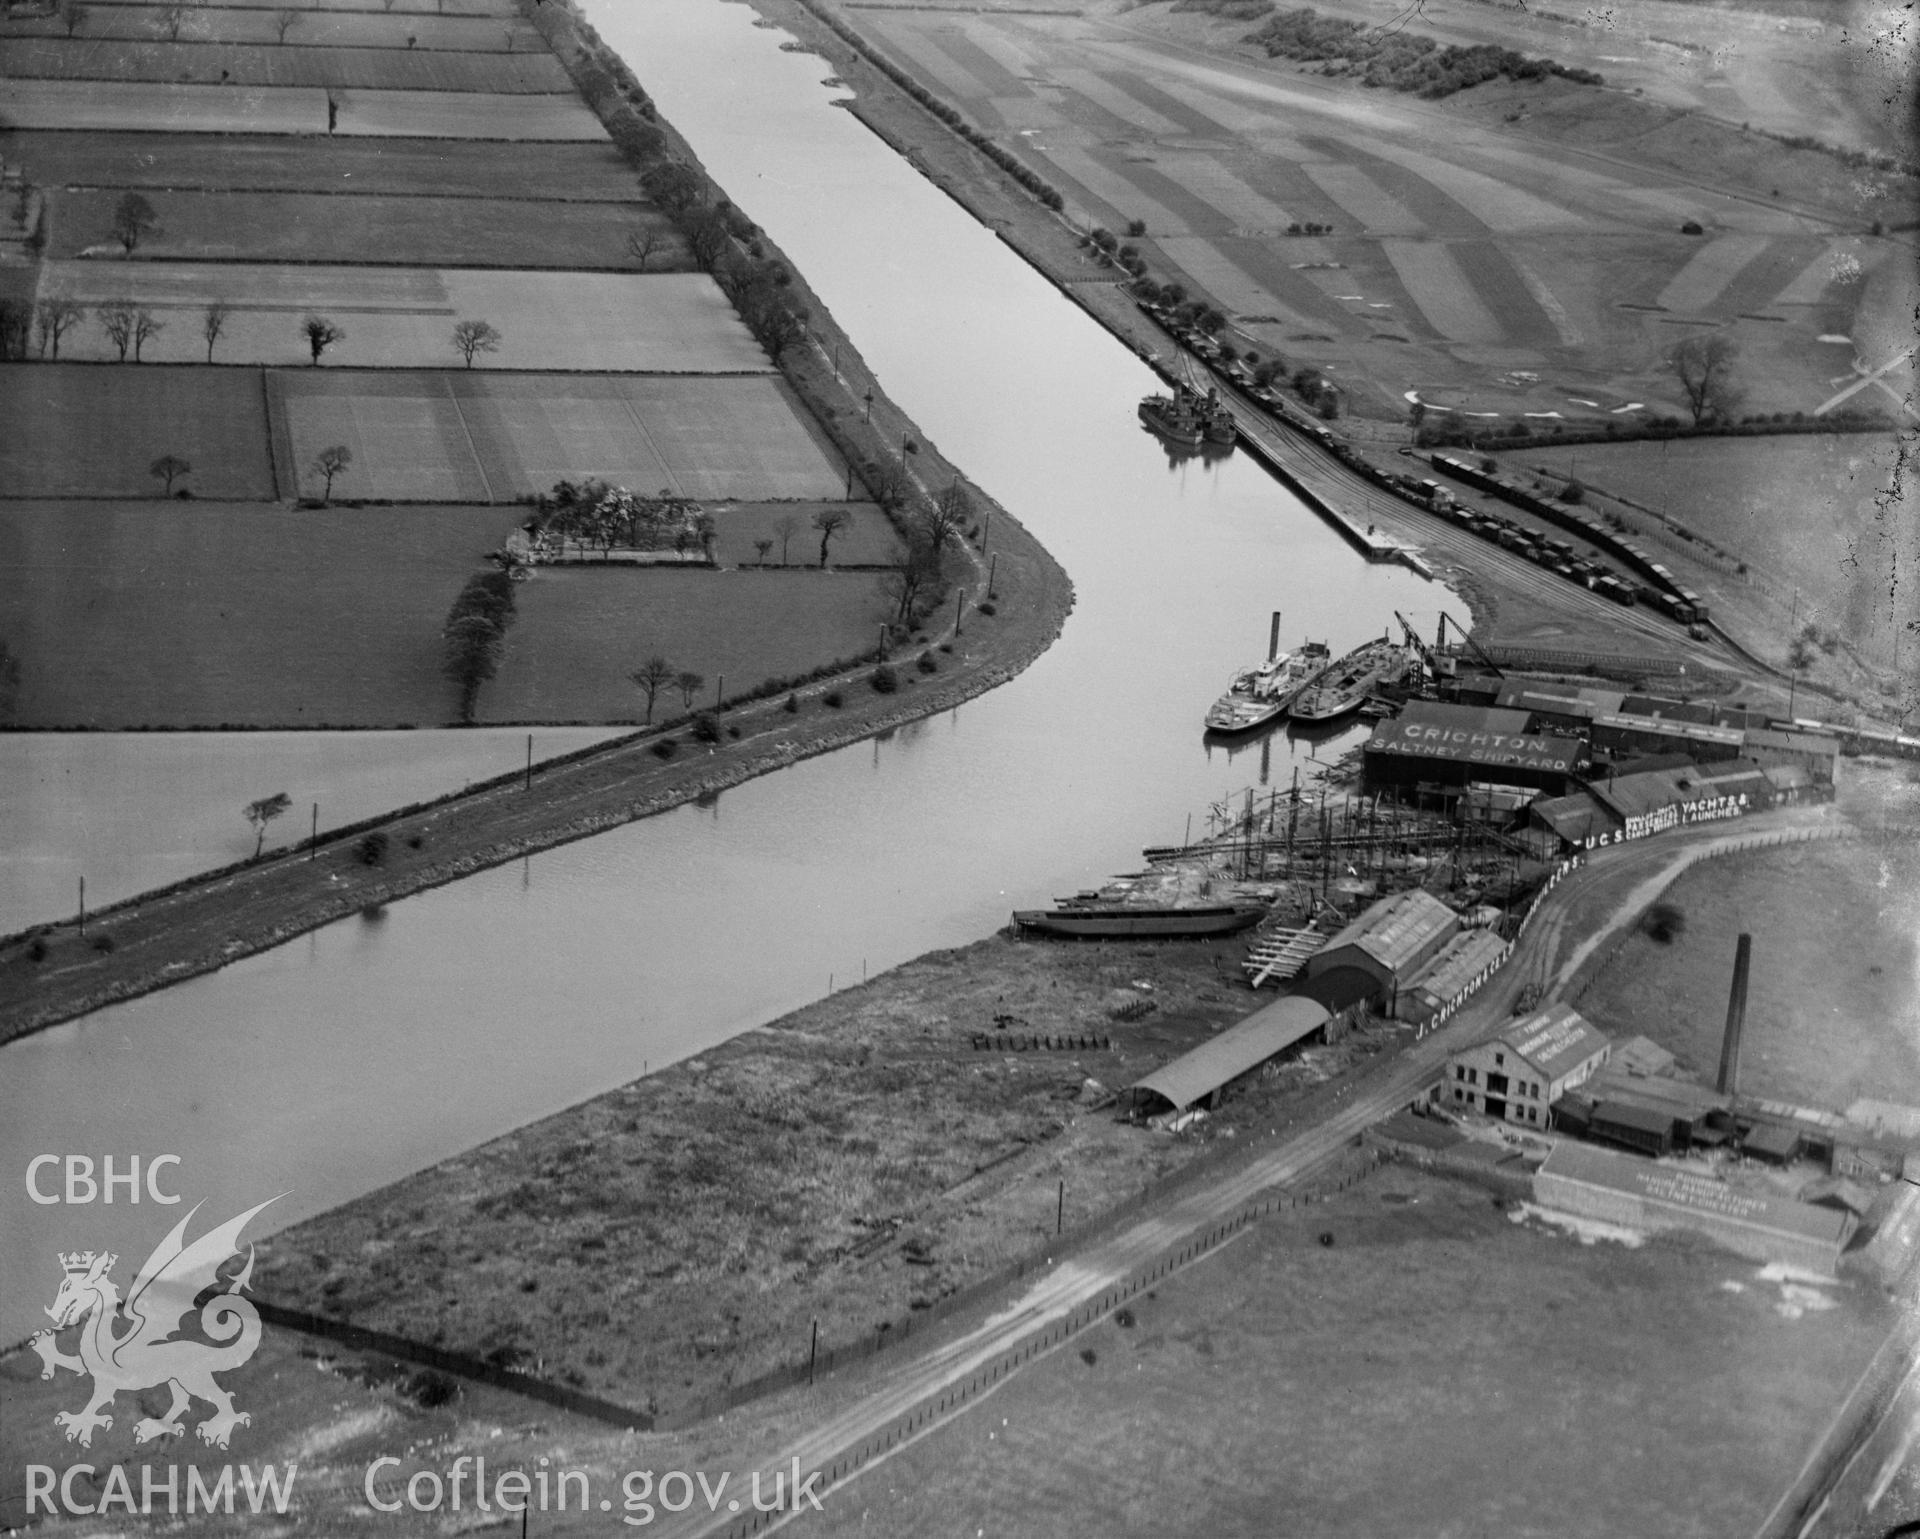 View of Crichton's shipyard, Saltney, oblique aerial view. 5?x4? black and white glass plate negative.